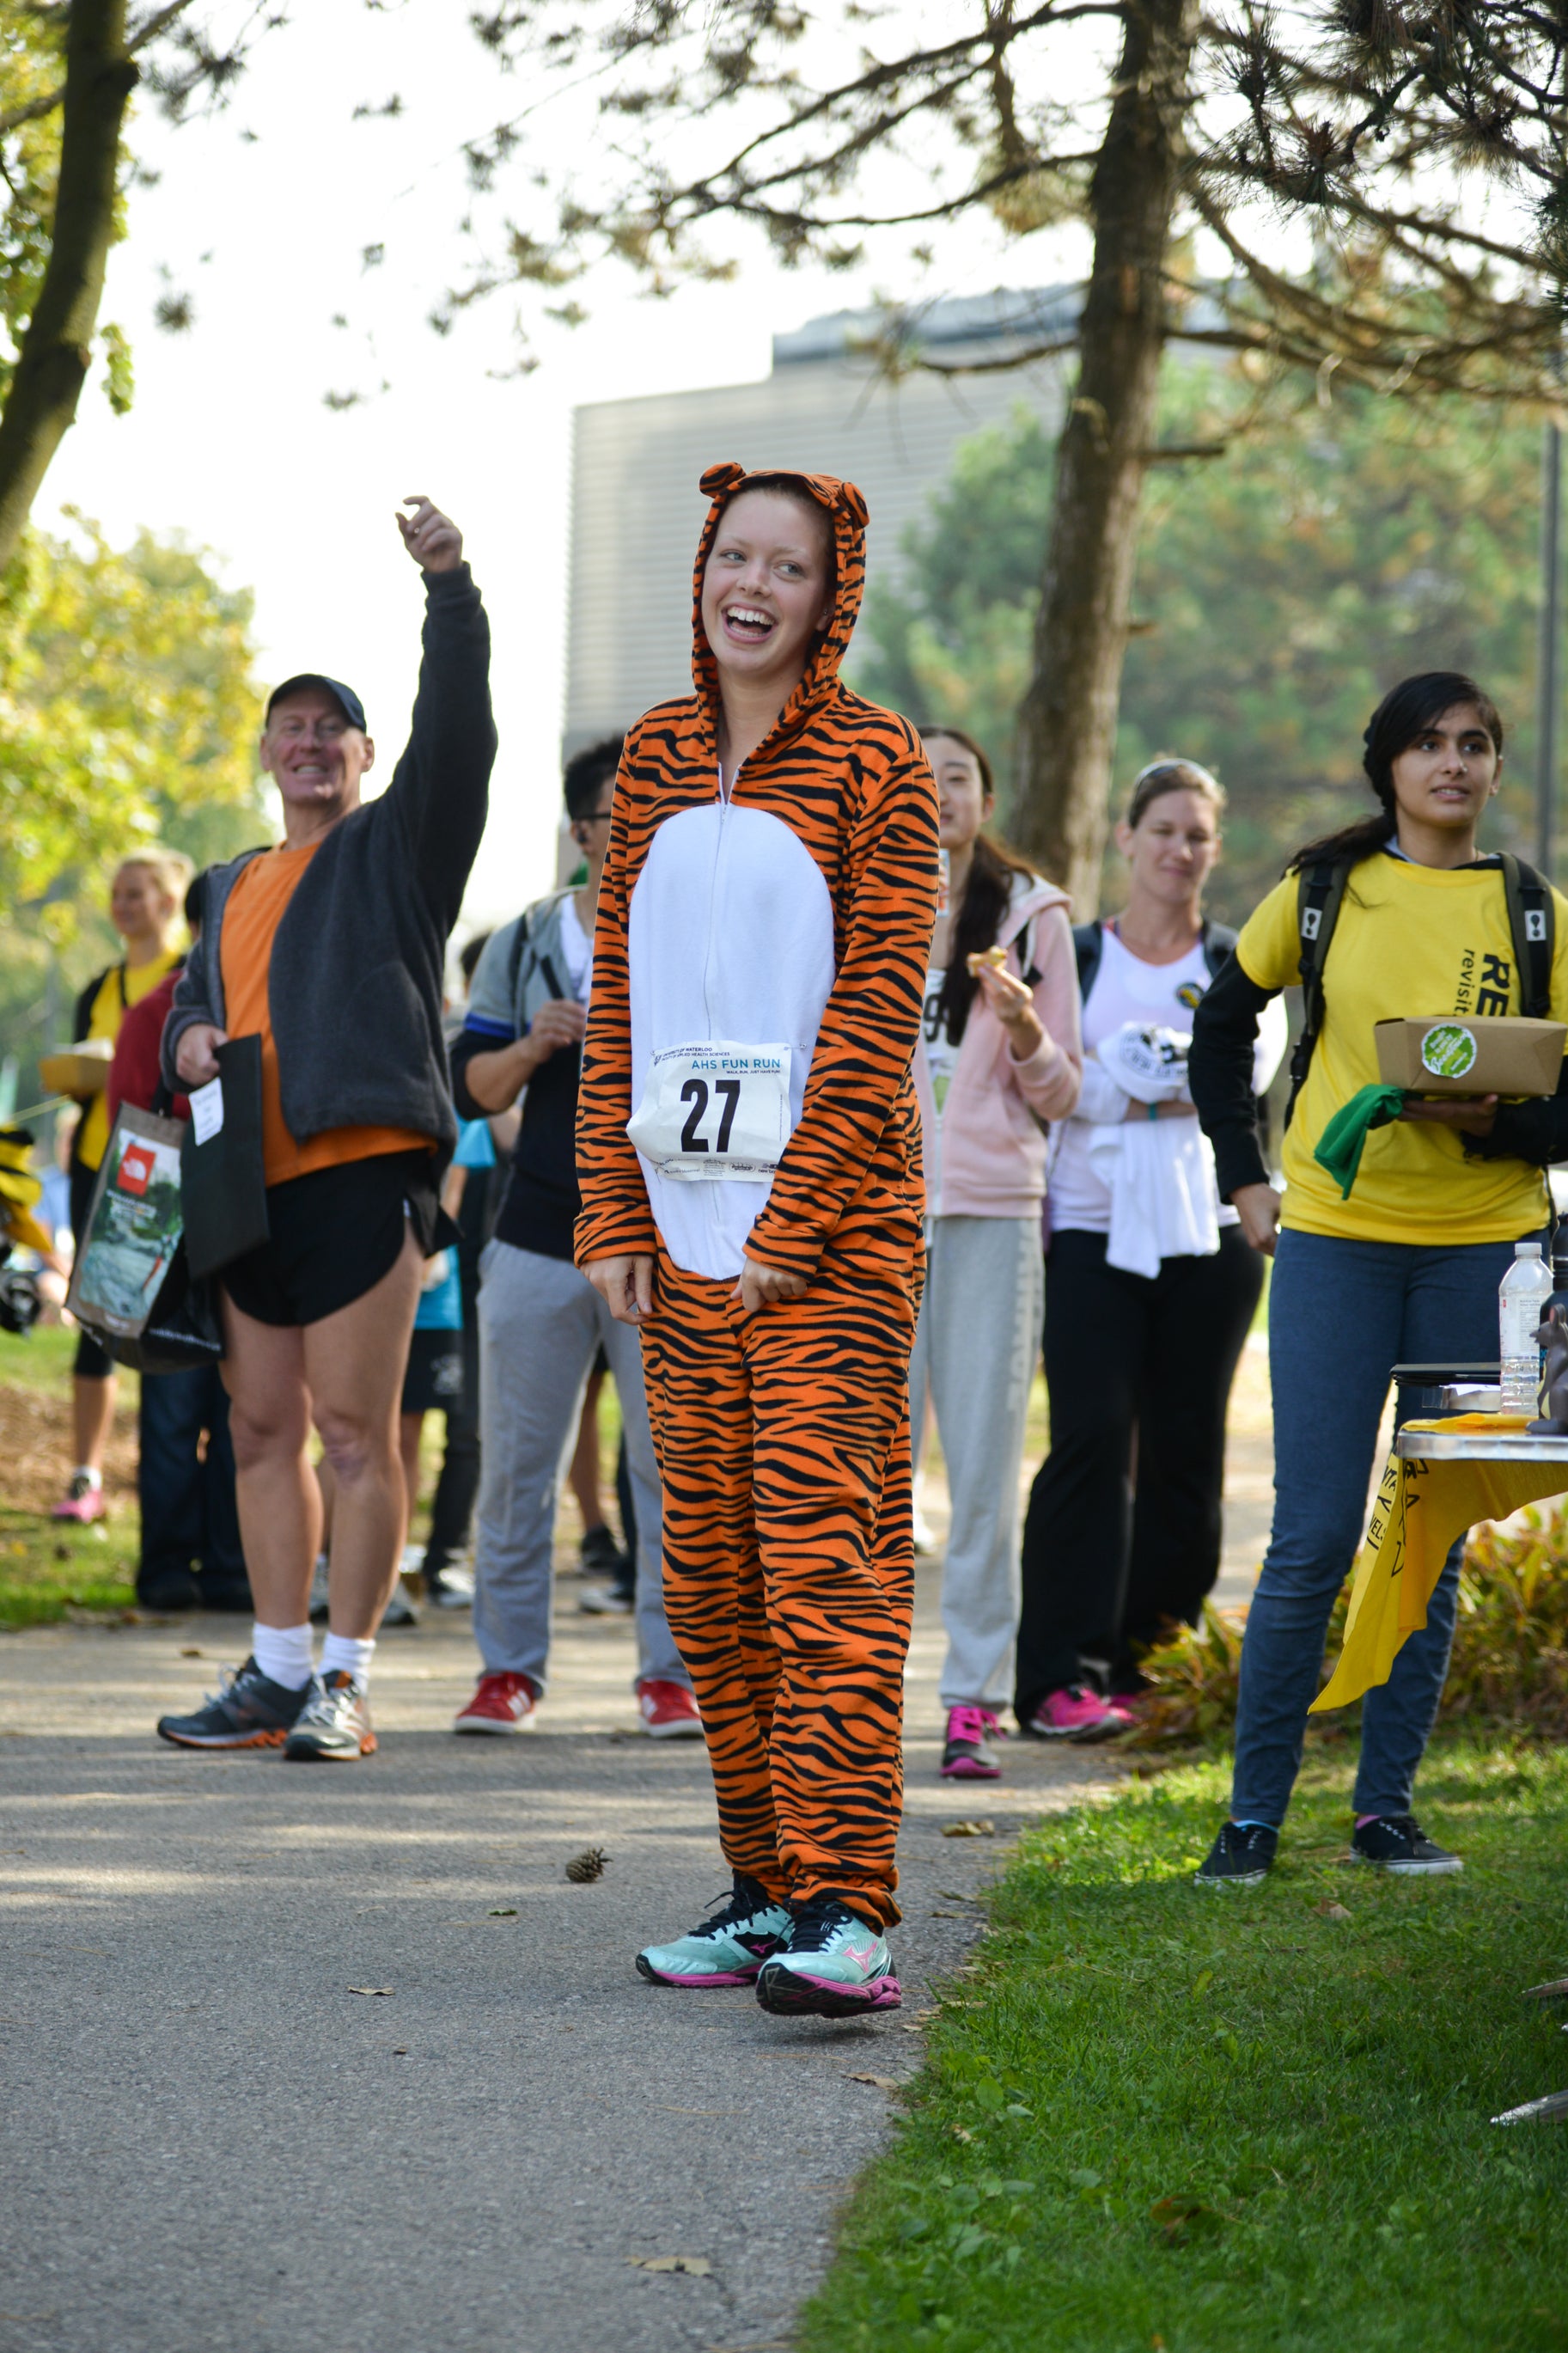 Lady wearing a tiger suit with participants in the background.